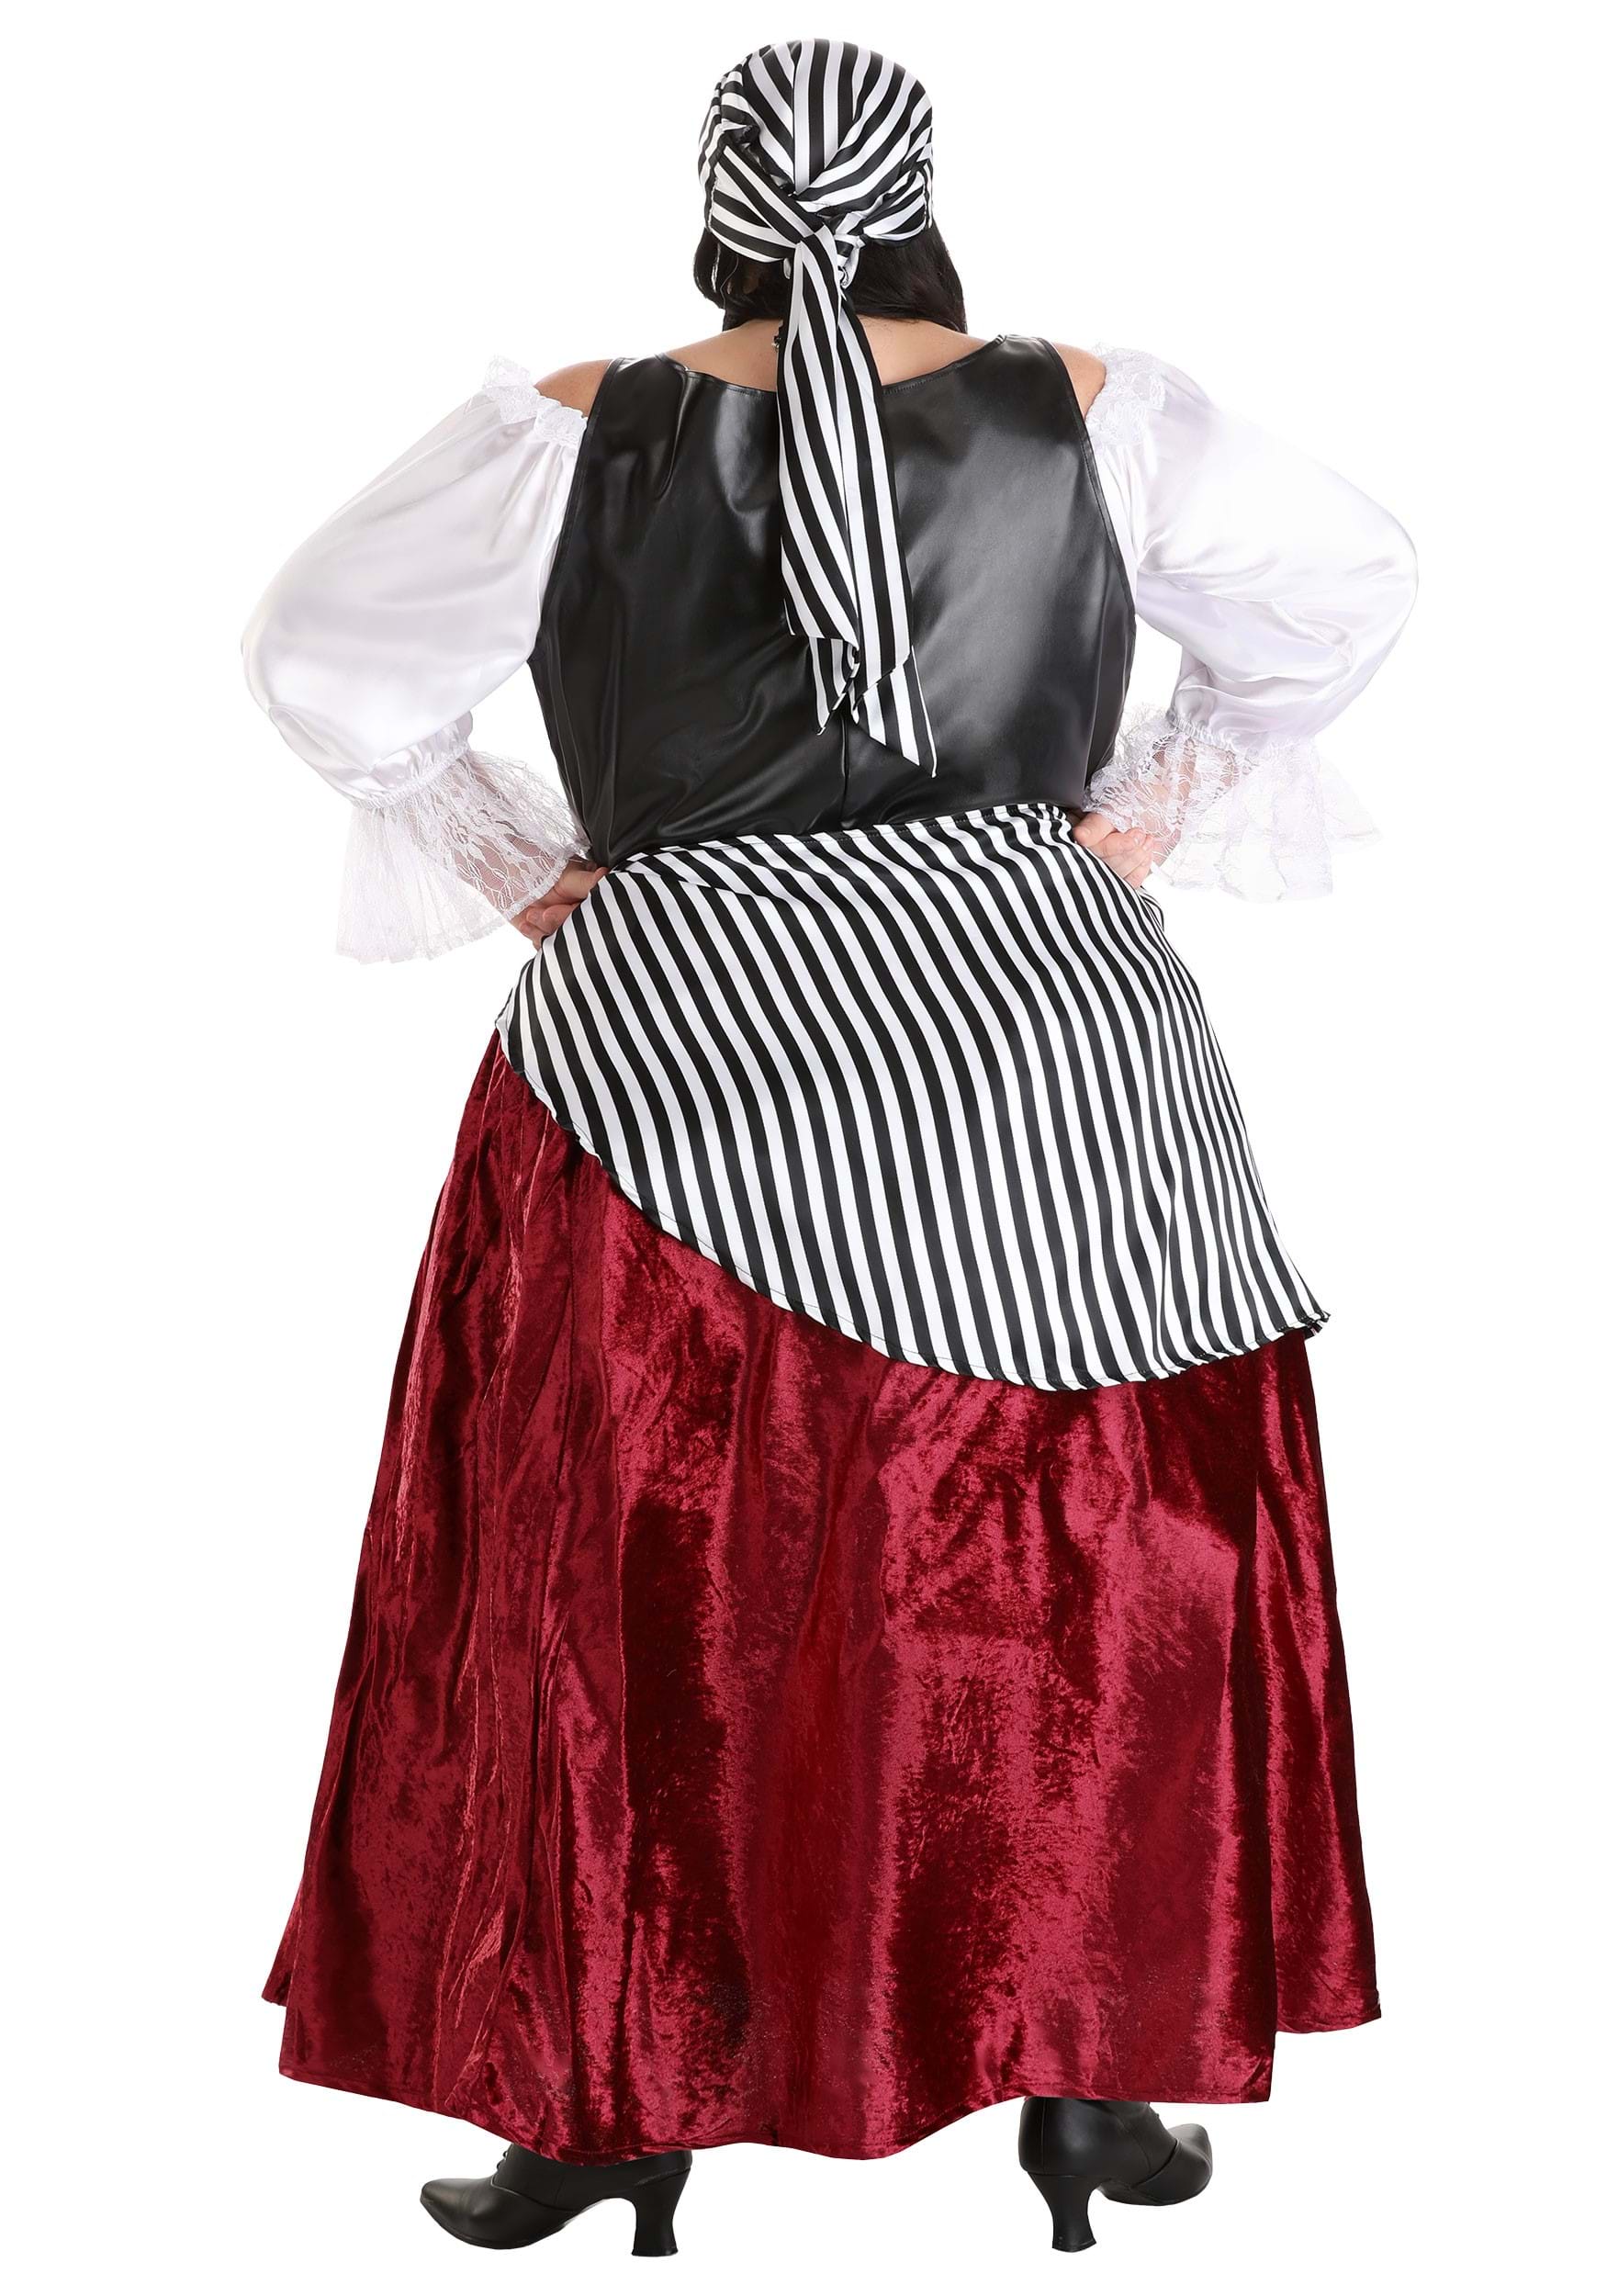 Deluxe Pirate Wench Plus Size Costume For Women , Pirate Dress